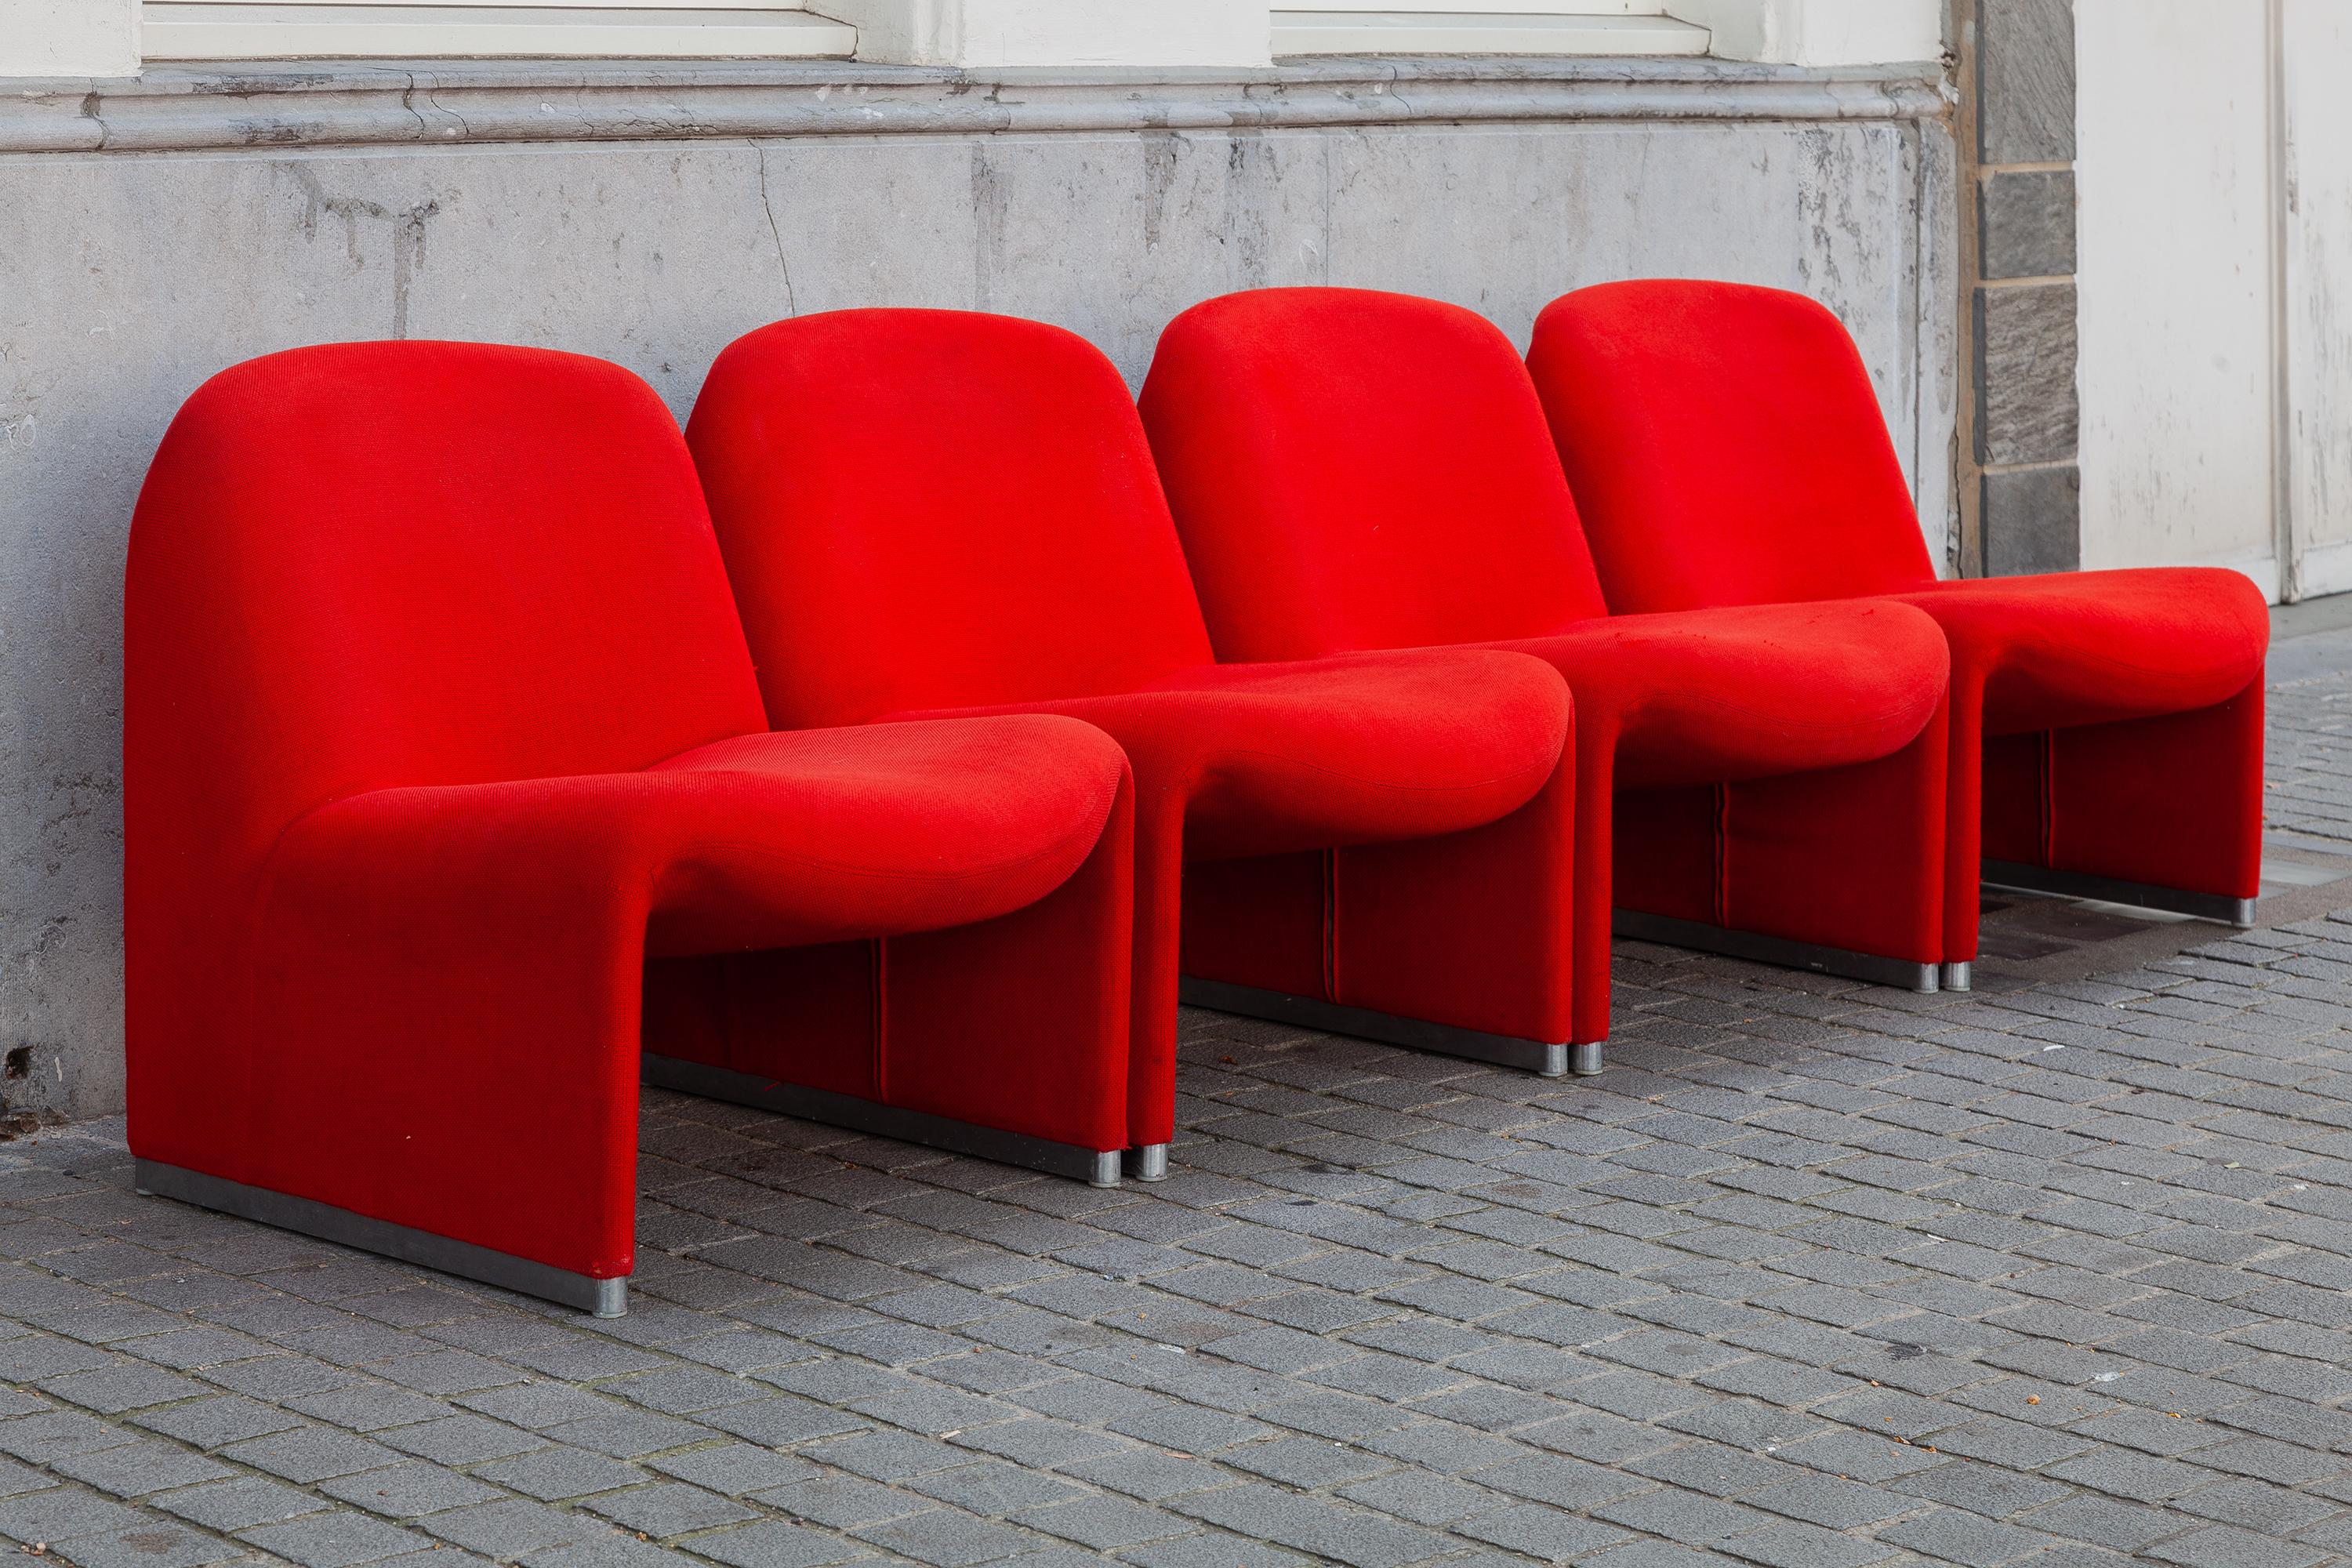 Set of 4 lounge “Alky” chairs designed by Giancarlo Piretti original Red wool upholstery. Aluminum frame and polished chrome foot rests. Beautiful organic curves reminiscent of Pierre Paulin designs. Produced by Castelli, 1972. Dimensions: 65 W x 70